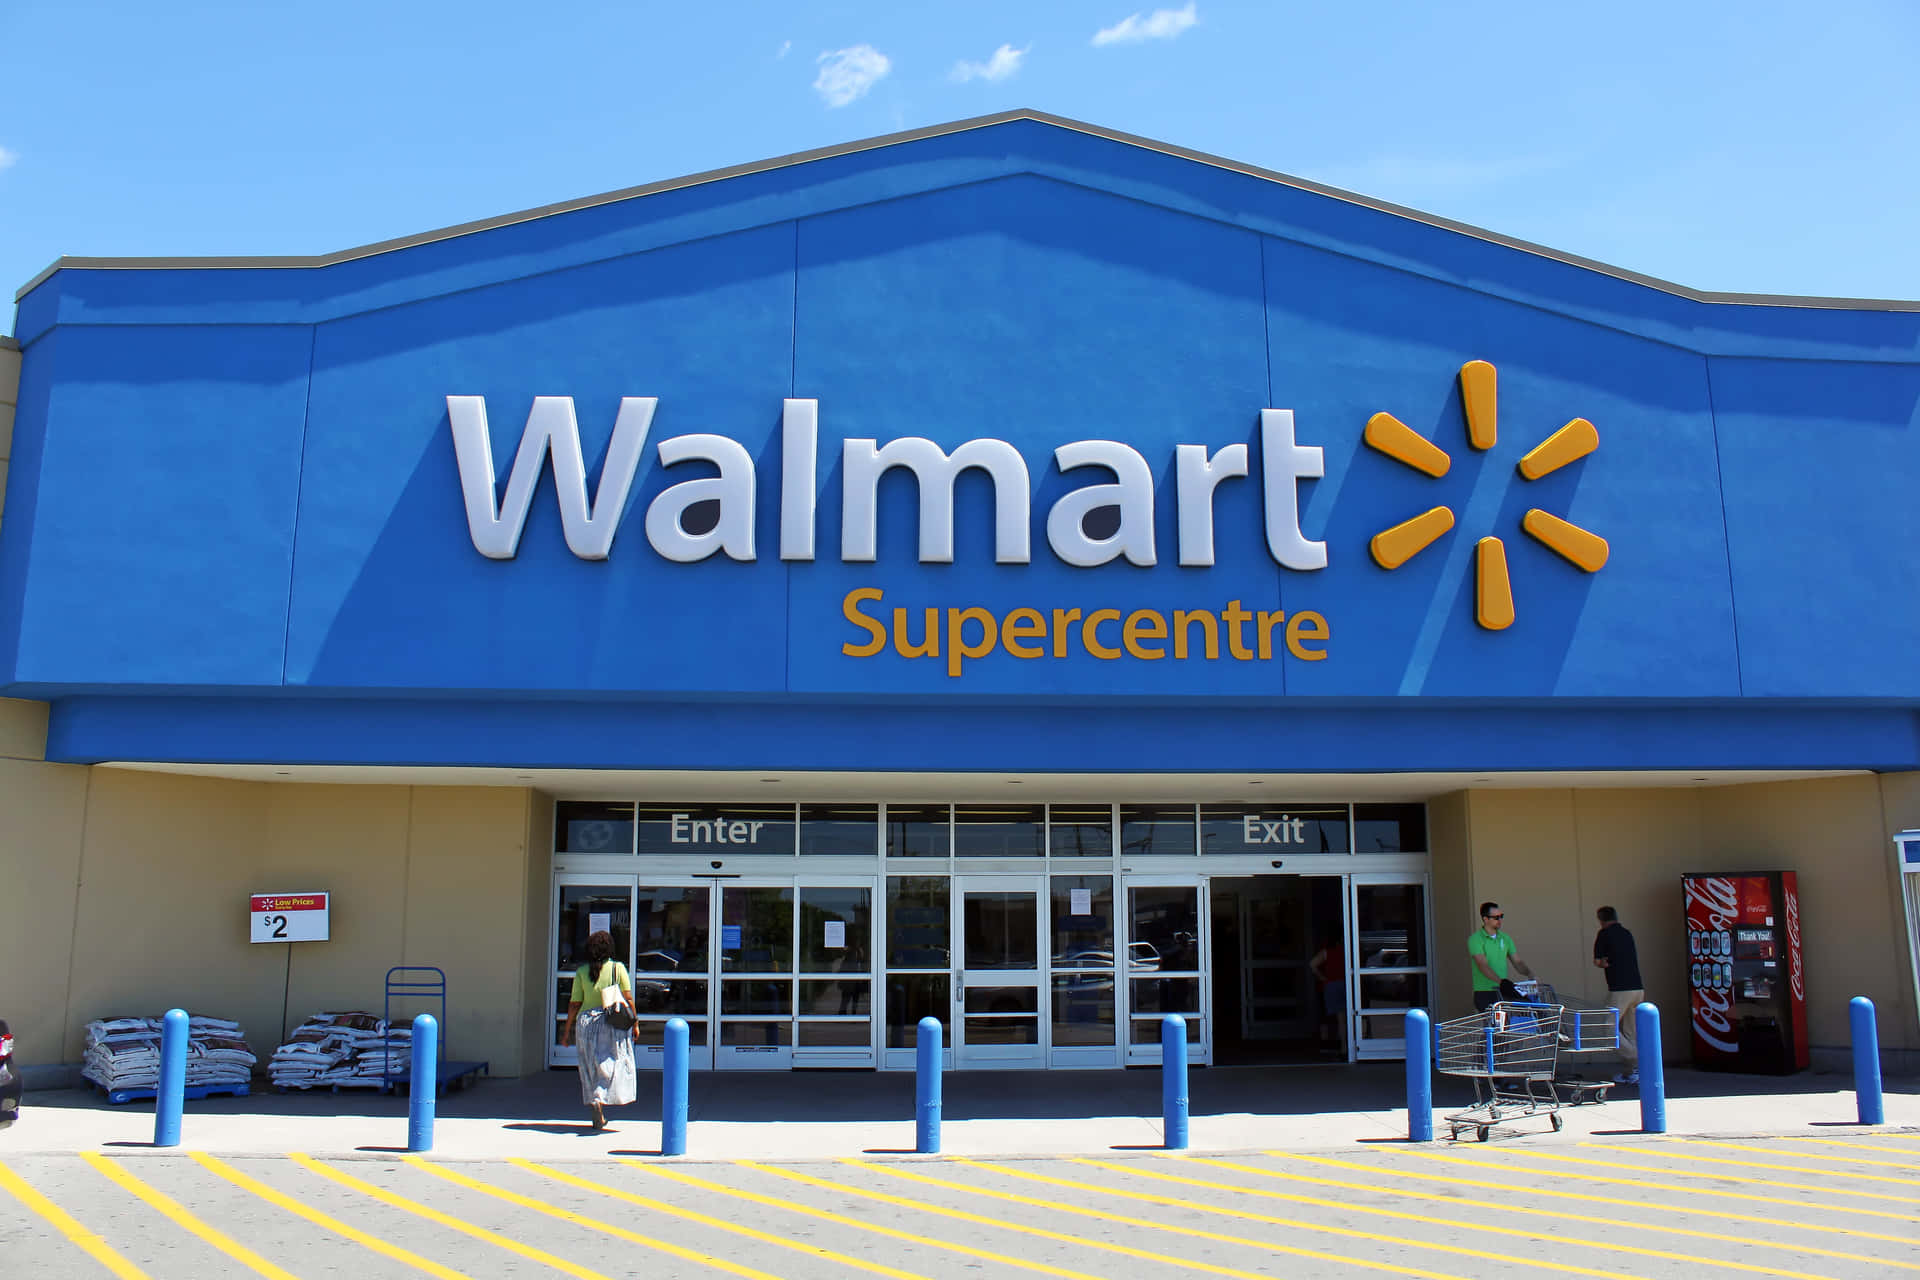 walmart supercentre is a large store with a blue sign